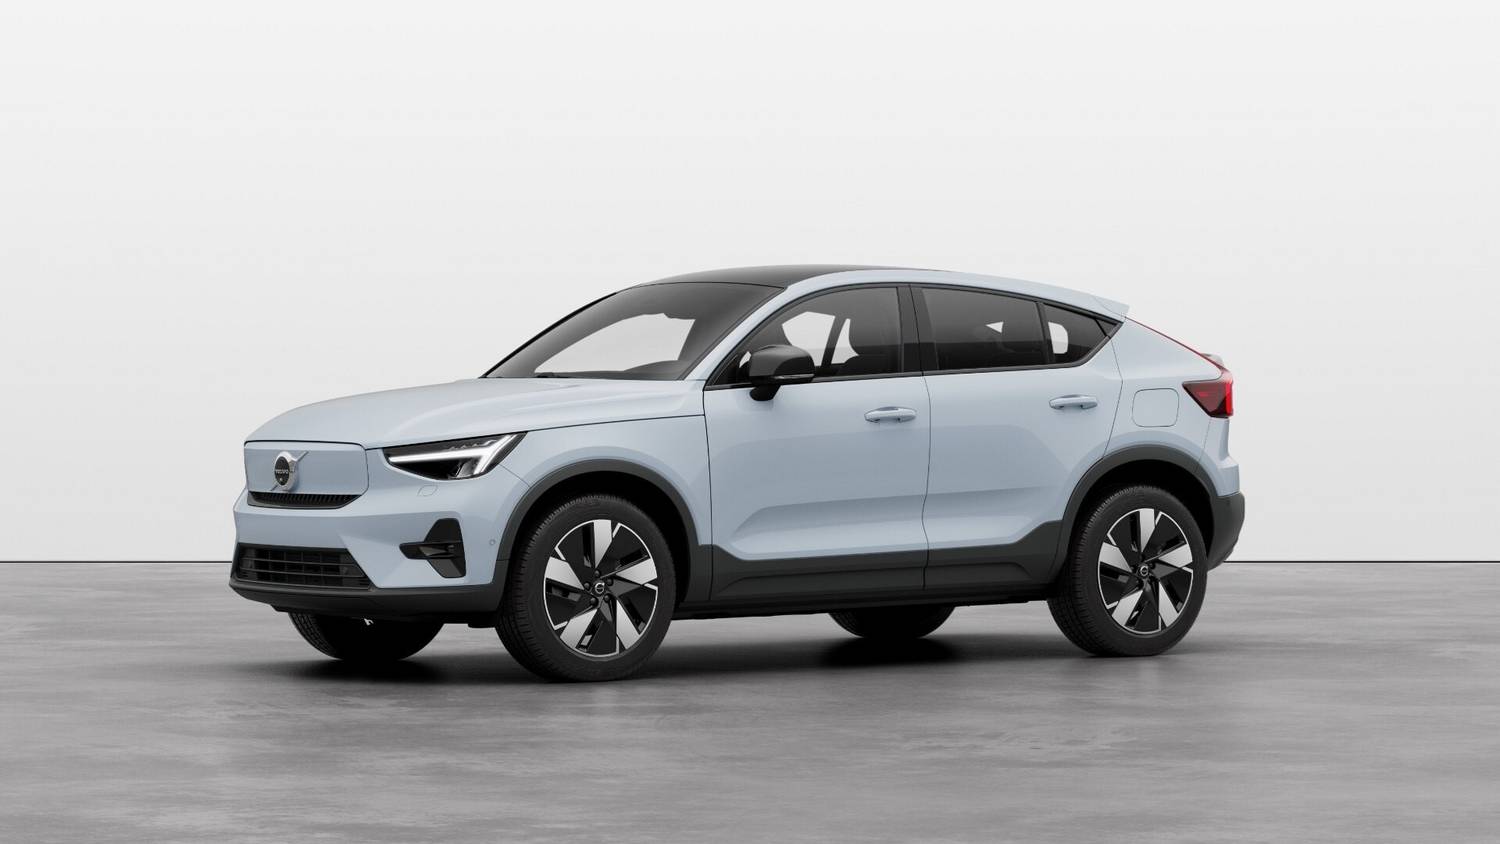 Totalcar – Magazine – For the first time in 25 years, Volvo is rear-wheel drive again